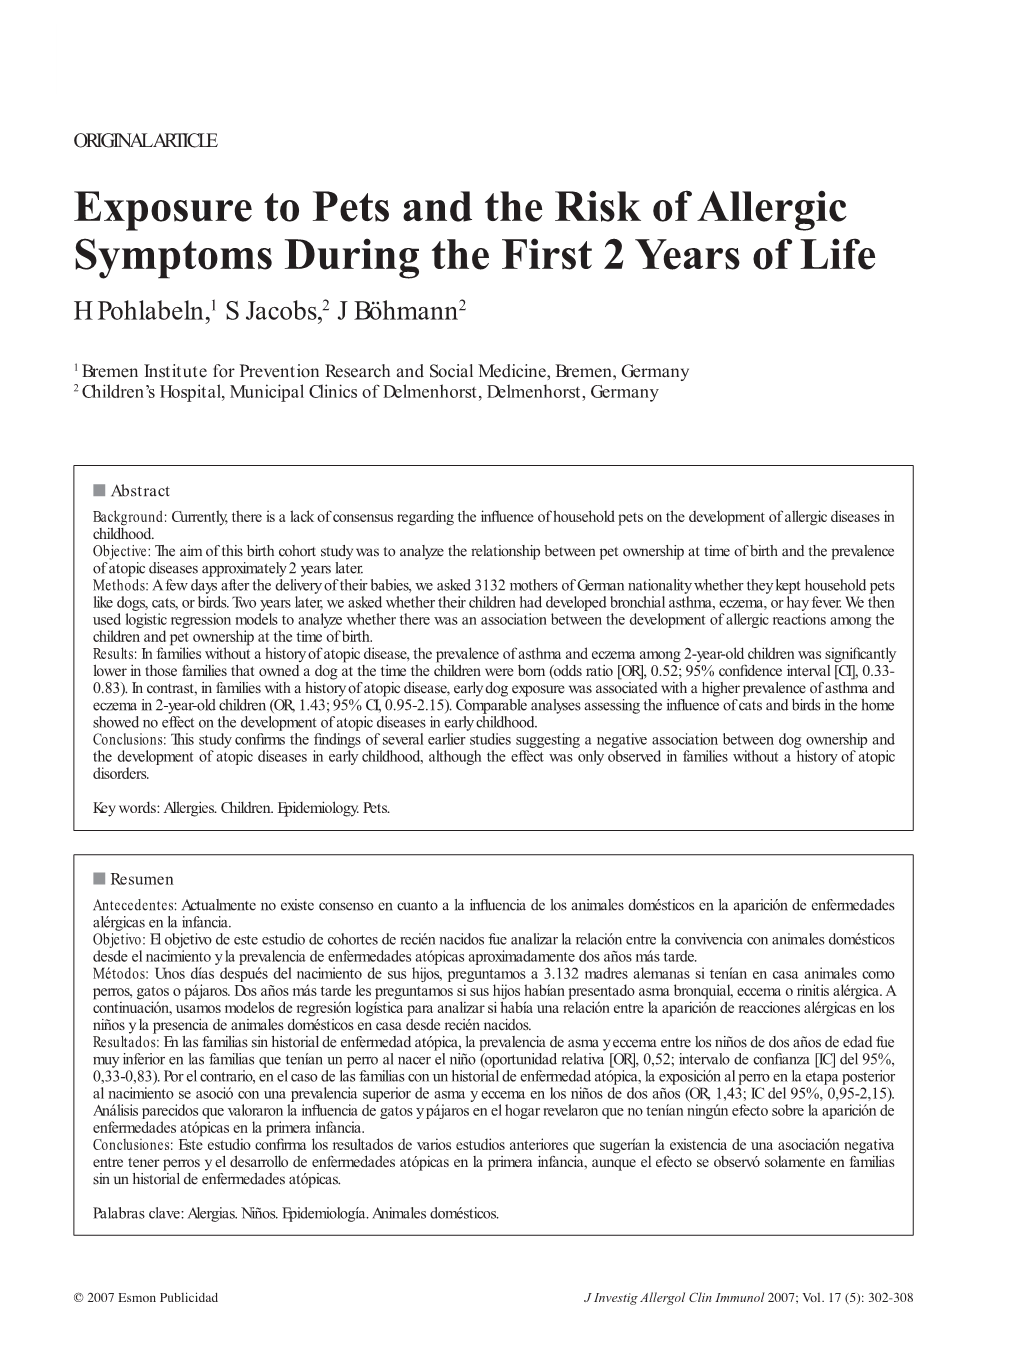 Exposure to Pets and the Risk of Allergic Symptoms During the First 2 Years of Life H Pohlabeln,1 S Jacobs,2 J Böhmann2